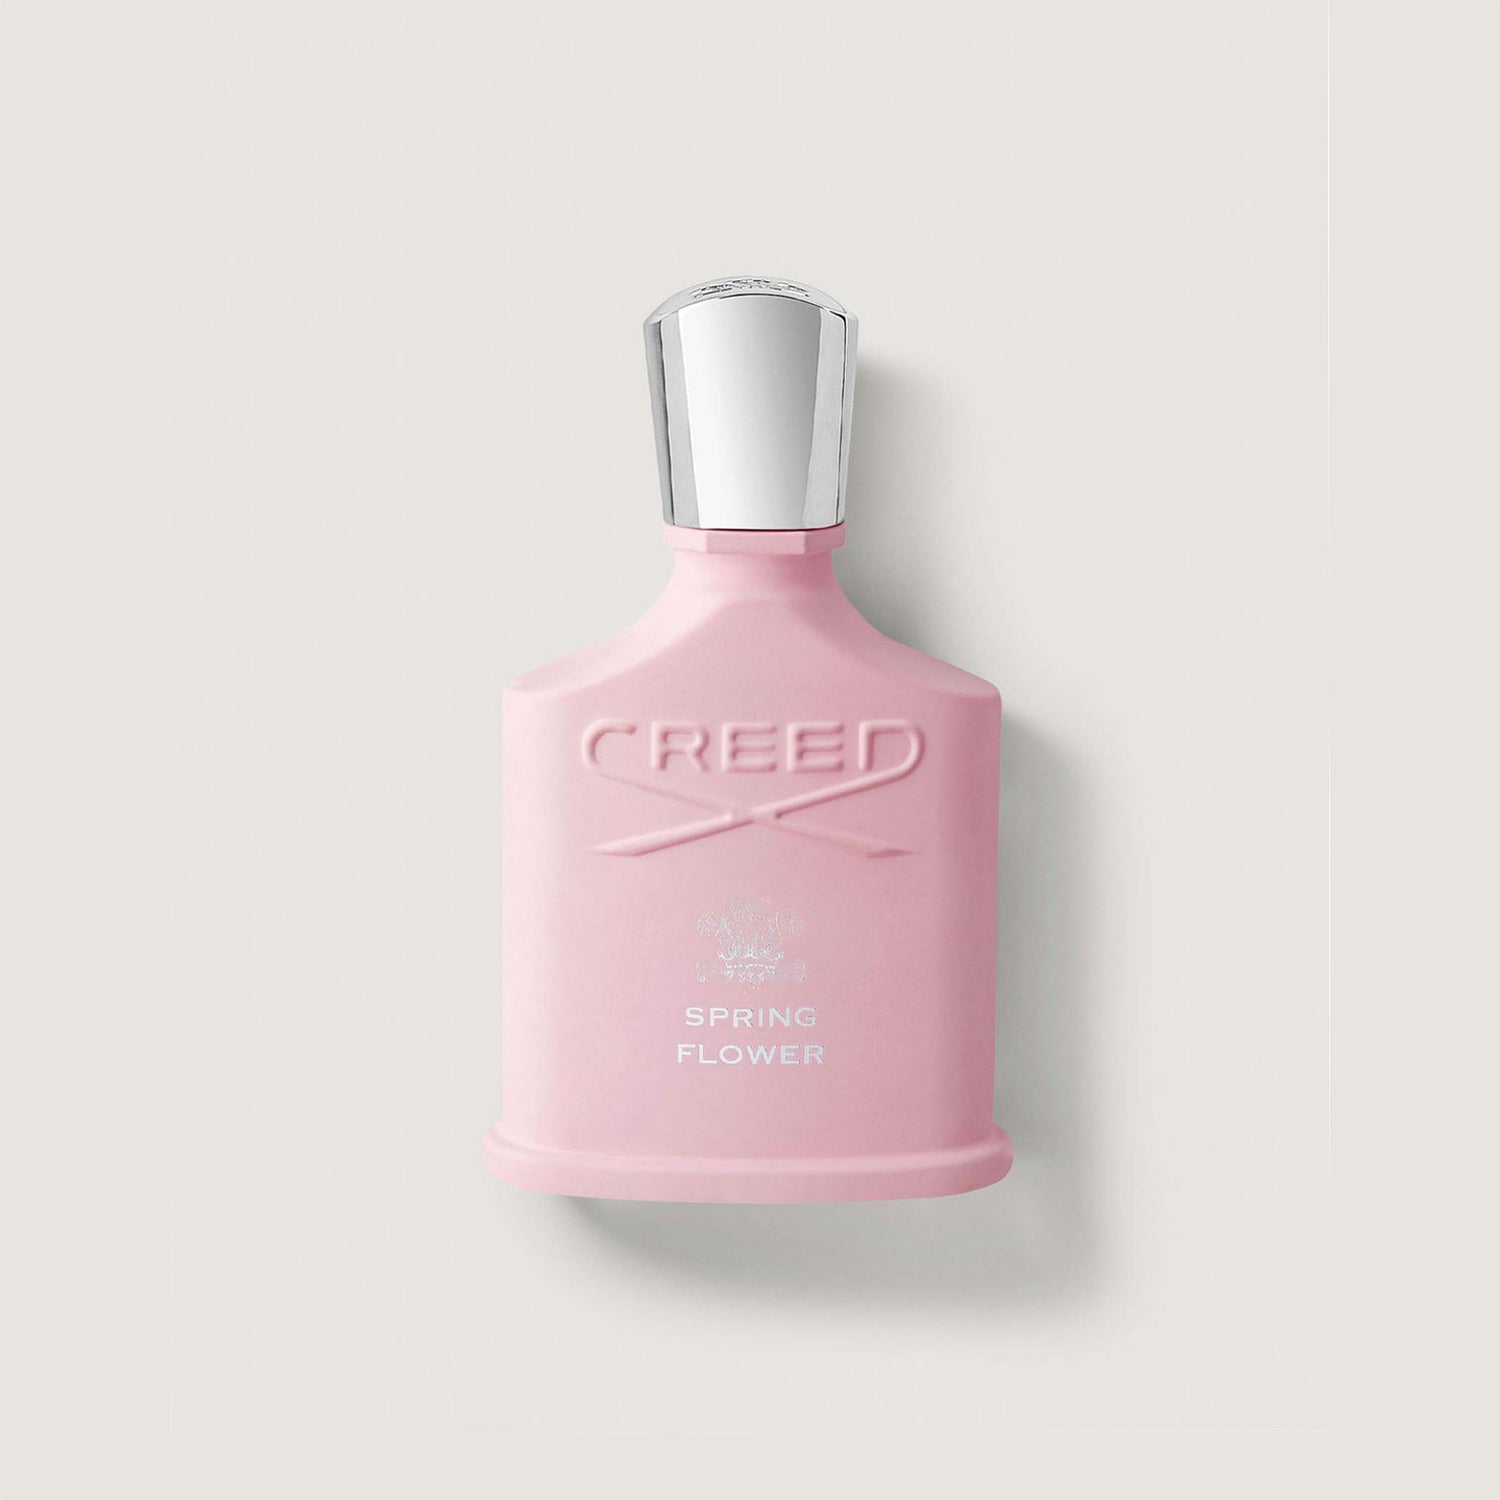 Corporate logo designers love pink for parfume brands